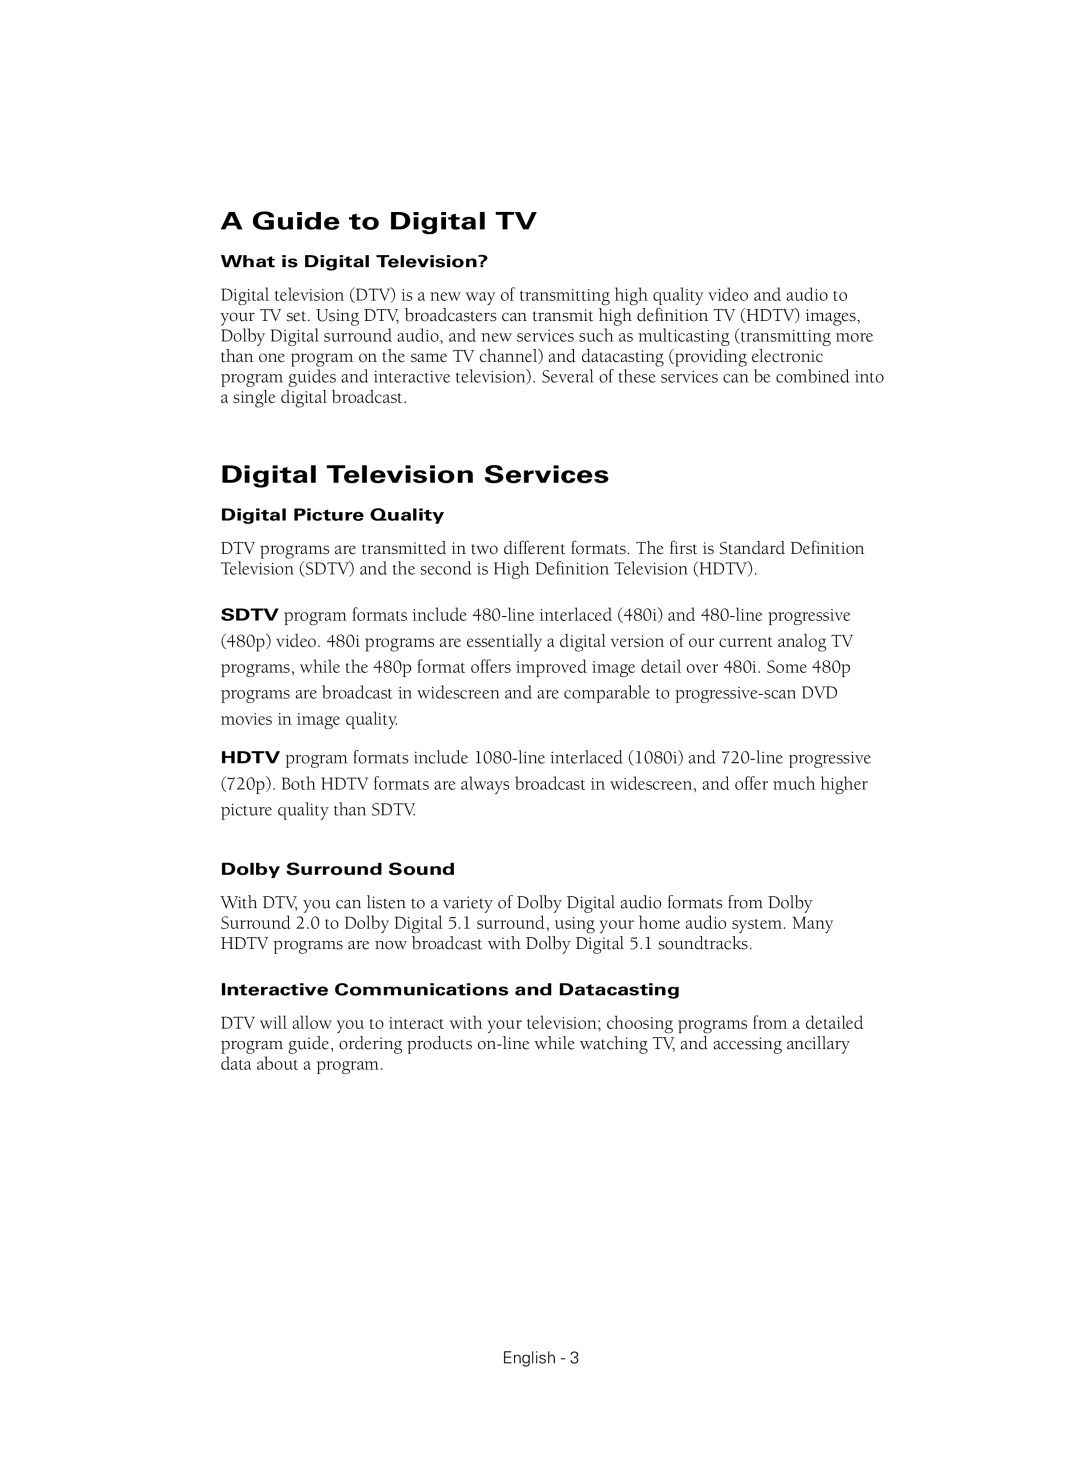 Samsung CL-29Z40MQ manual Guide to Digital TV, Digital Television Services 